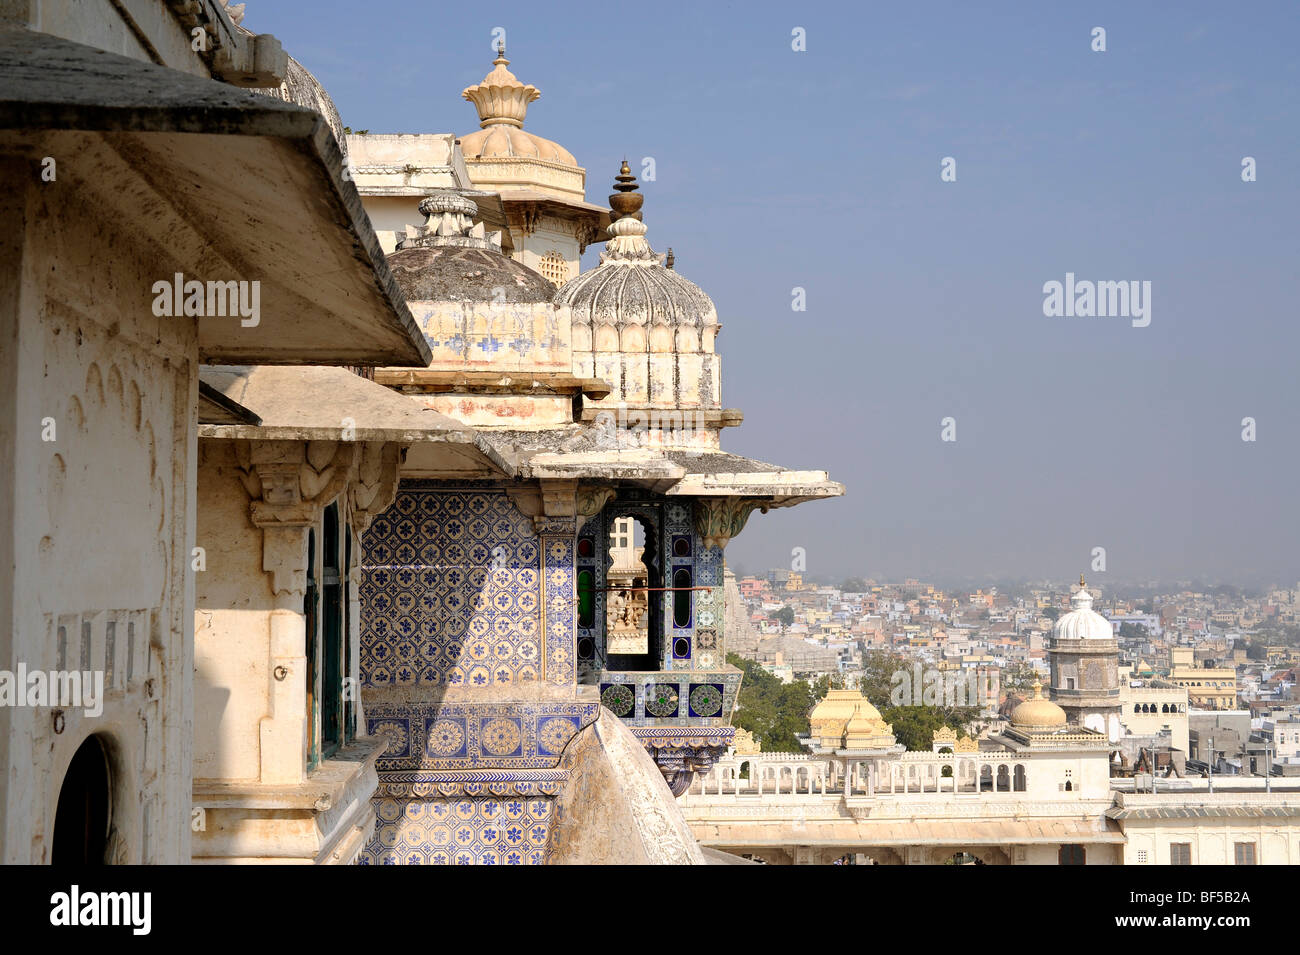 City palace of Udaipur, detail with view of the city, Udaipur, Rajasthan, North India, India, South Asia, Asia Stock Photo